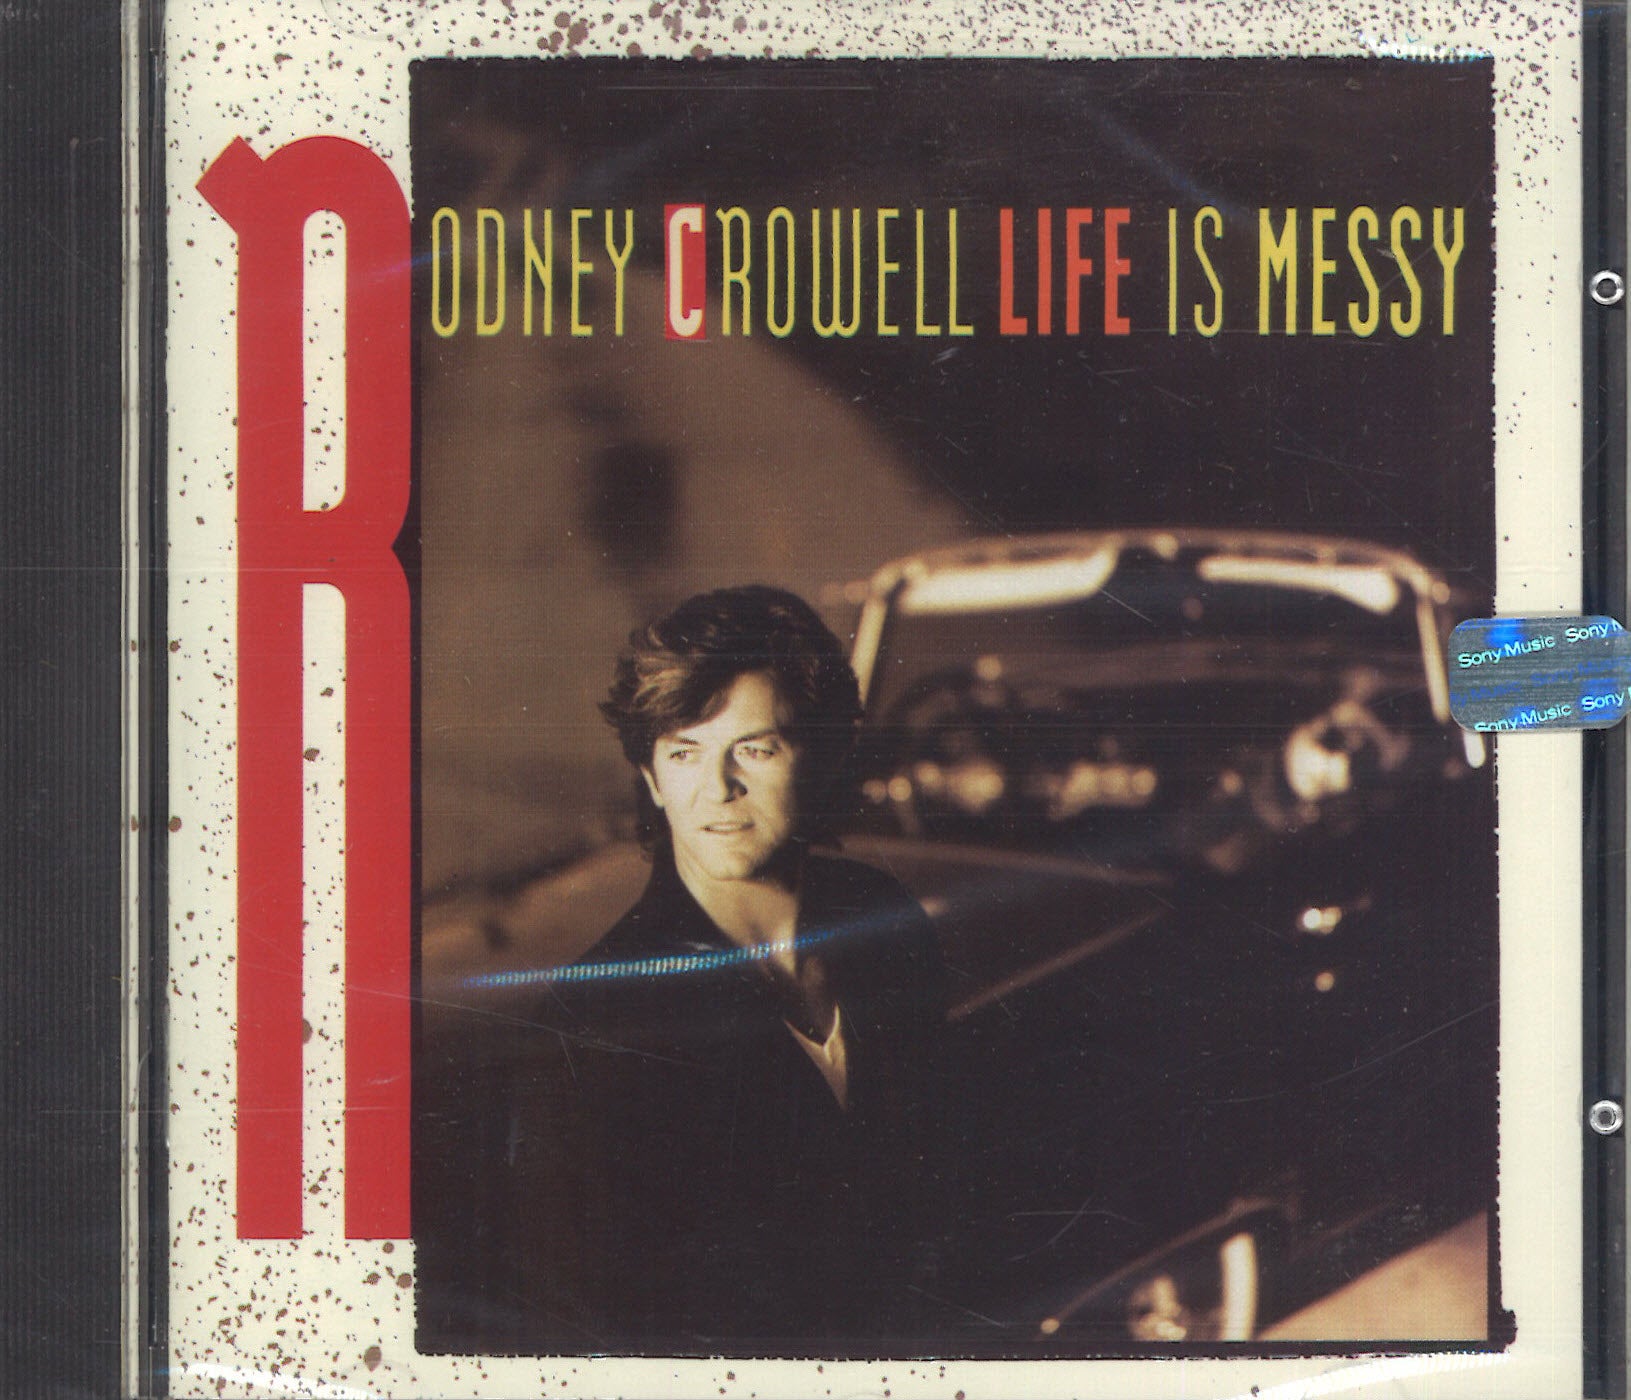 Rodney Crowell Life Is Messy